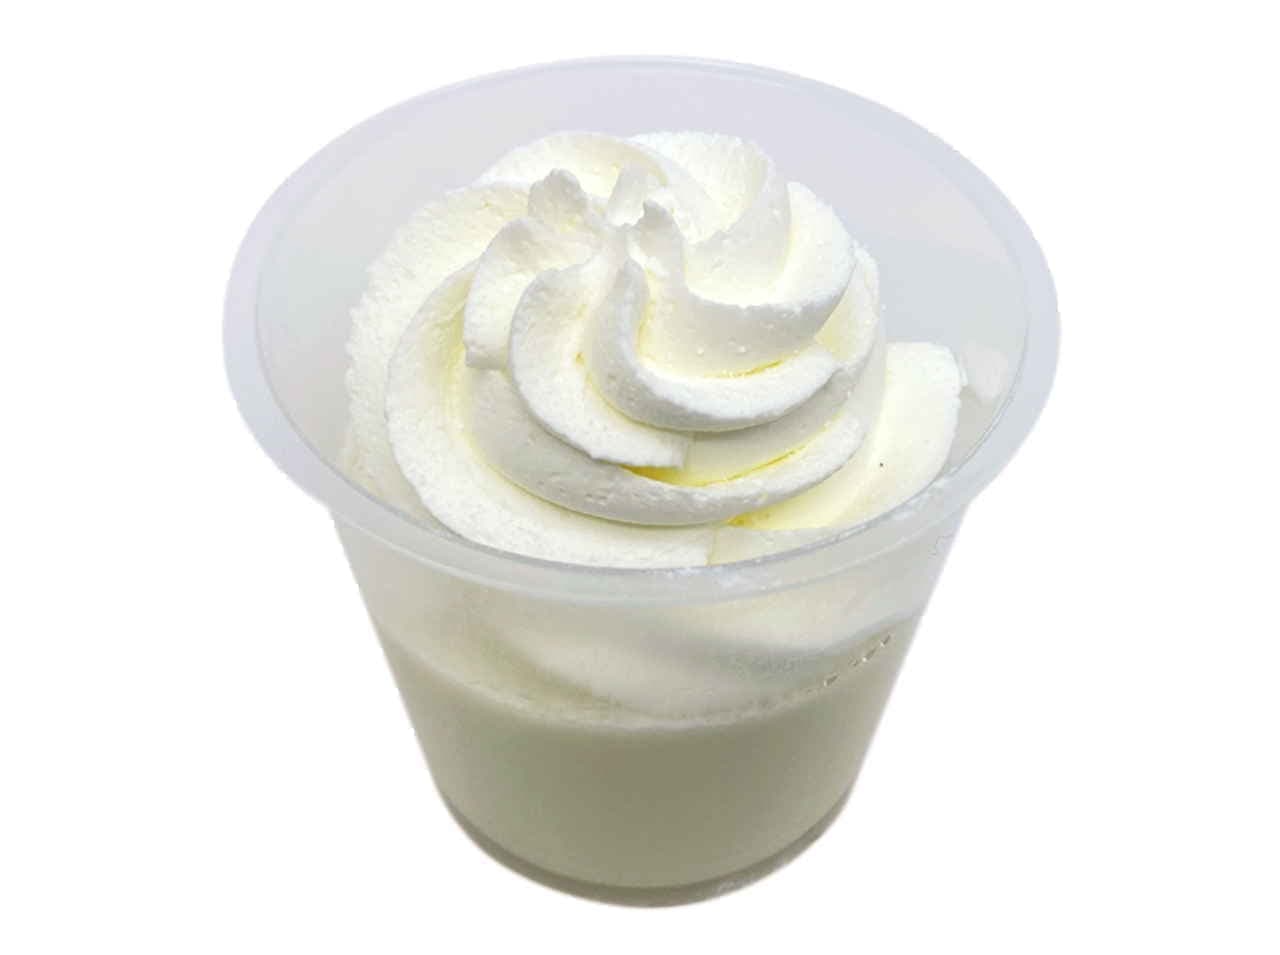 7-ELEVEN Milk Pudding with Whipped Cream